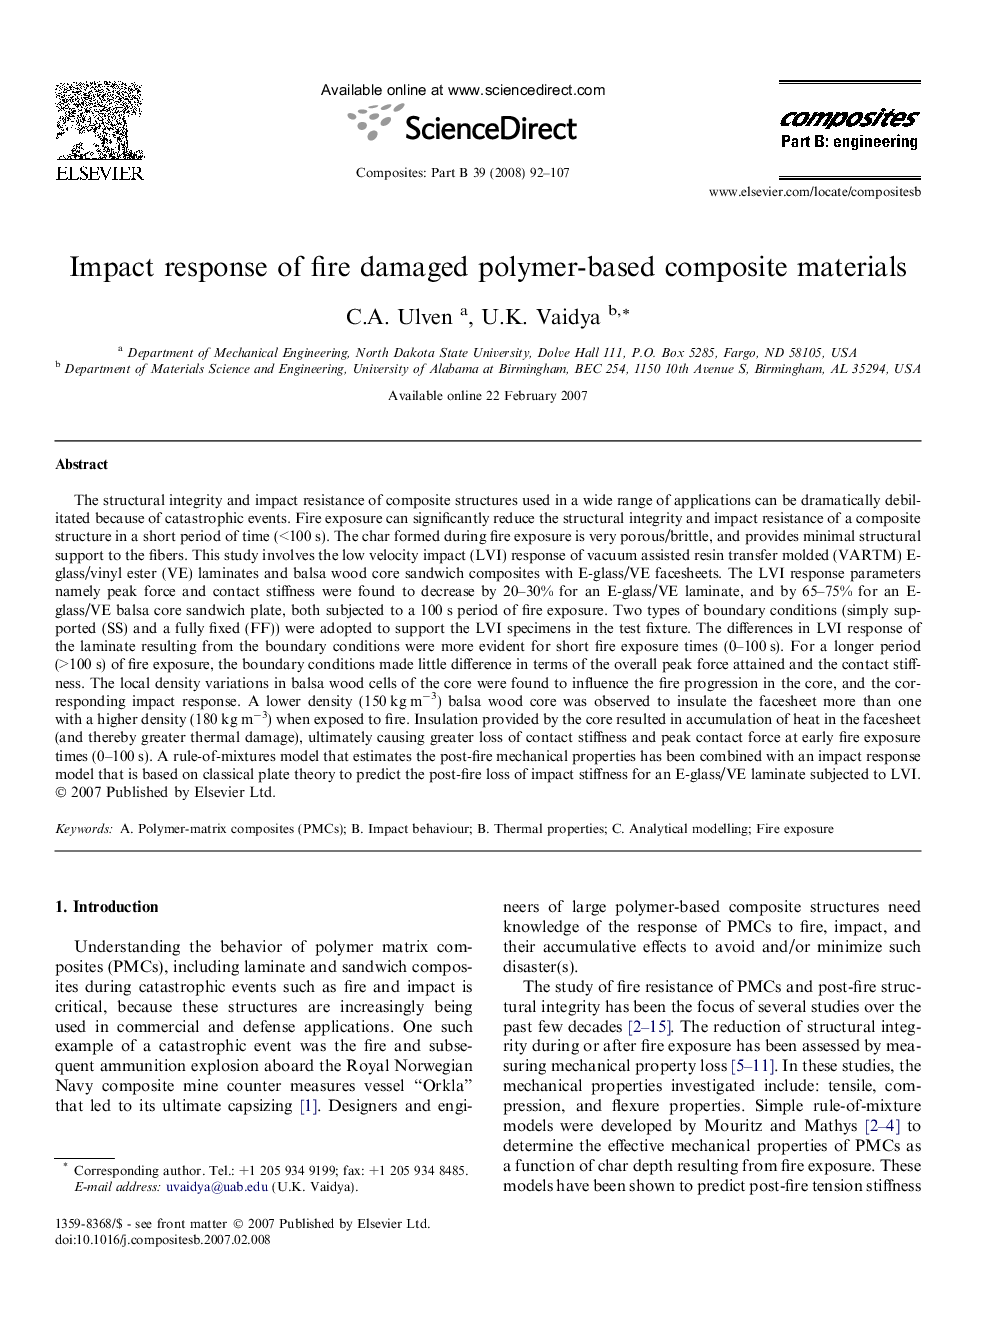 Impact response of fire damaged polymer-based composite materials